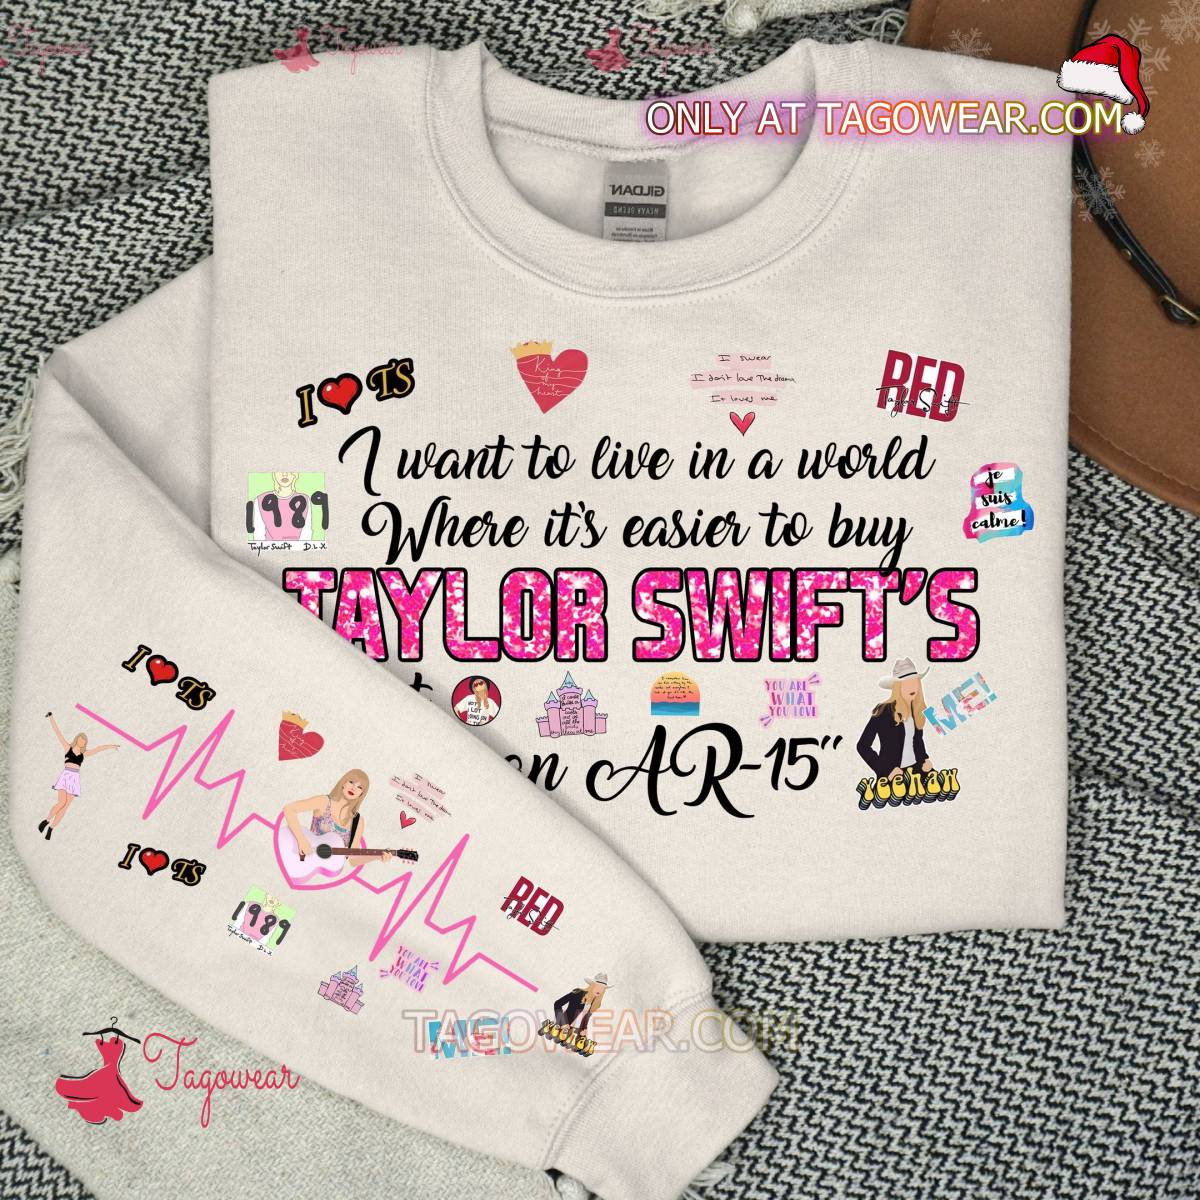 I Want To Live In A World Where It's Easier To Buy Taylor Swift Ticket Than An Ar-15 Sweatshirt